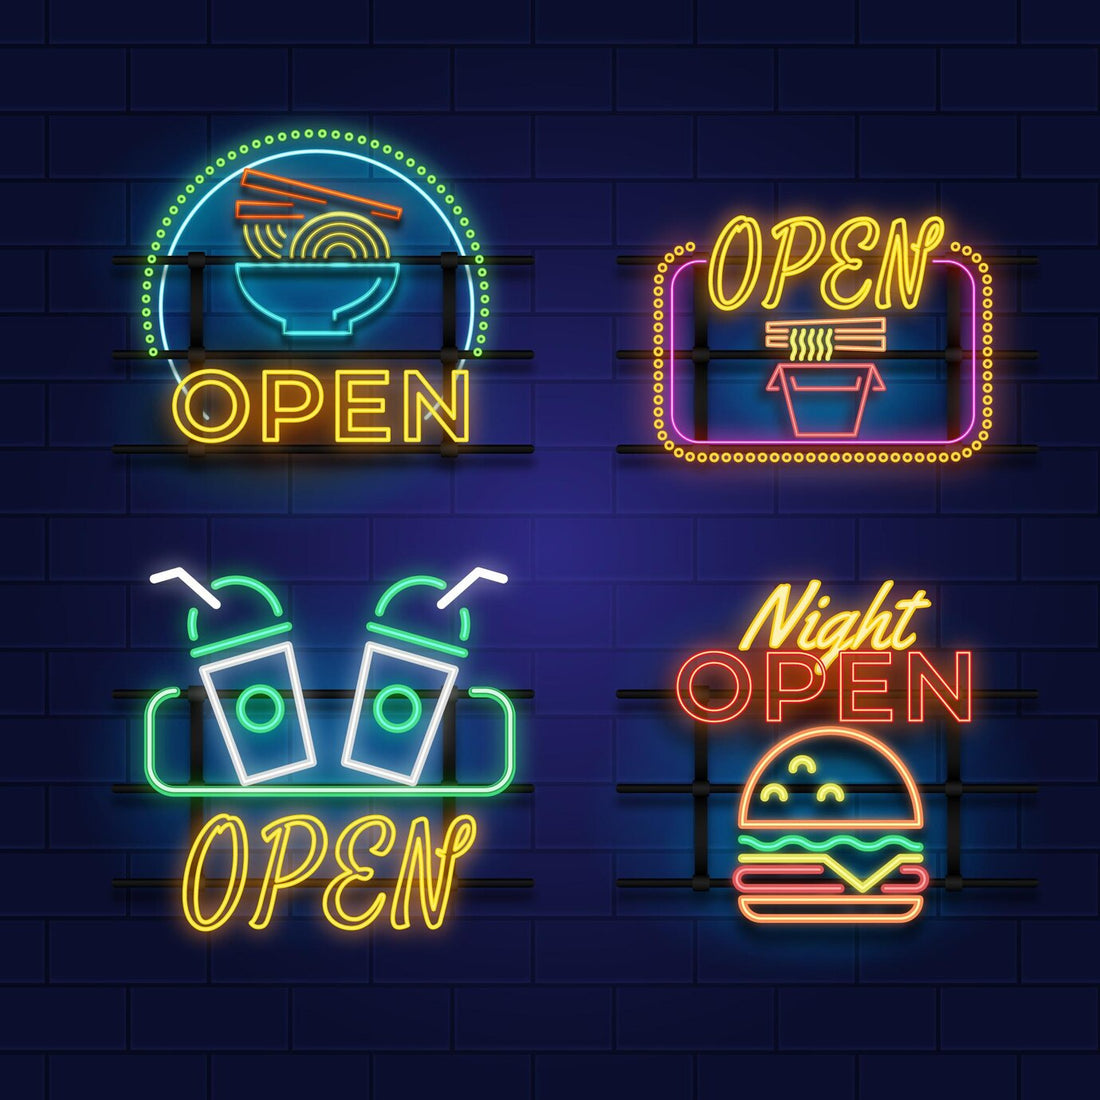 Common restaurant LED signs